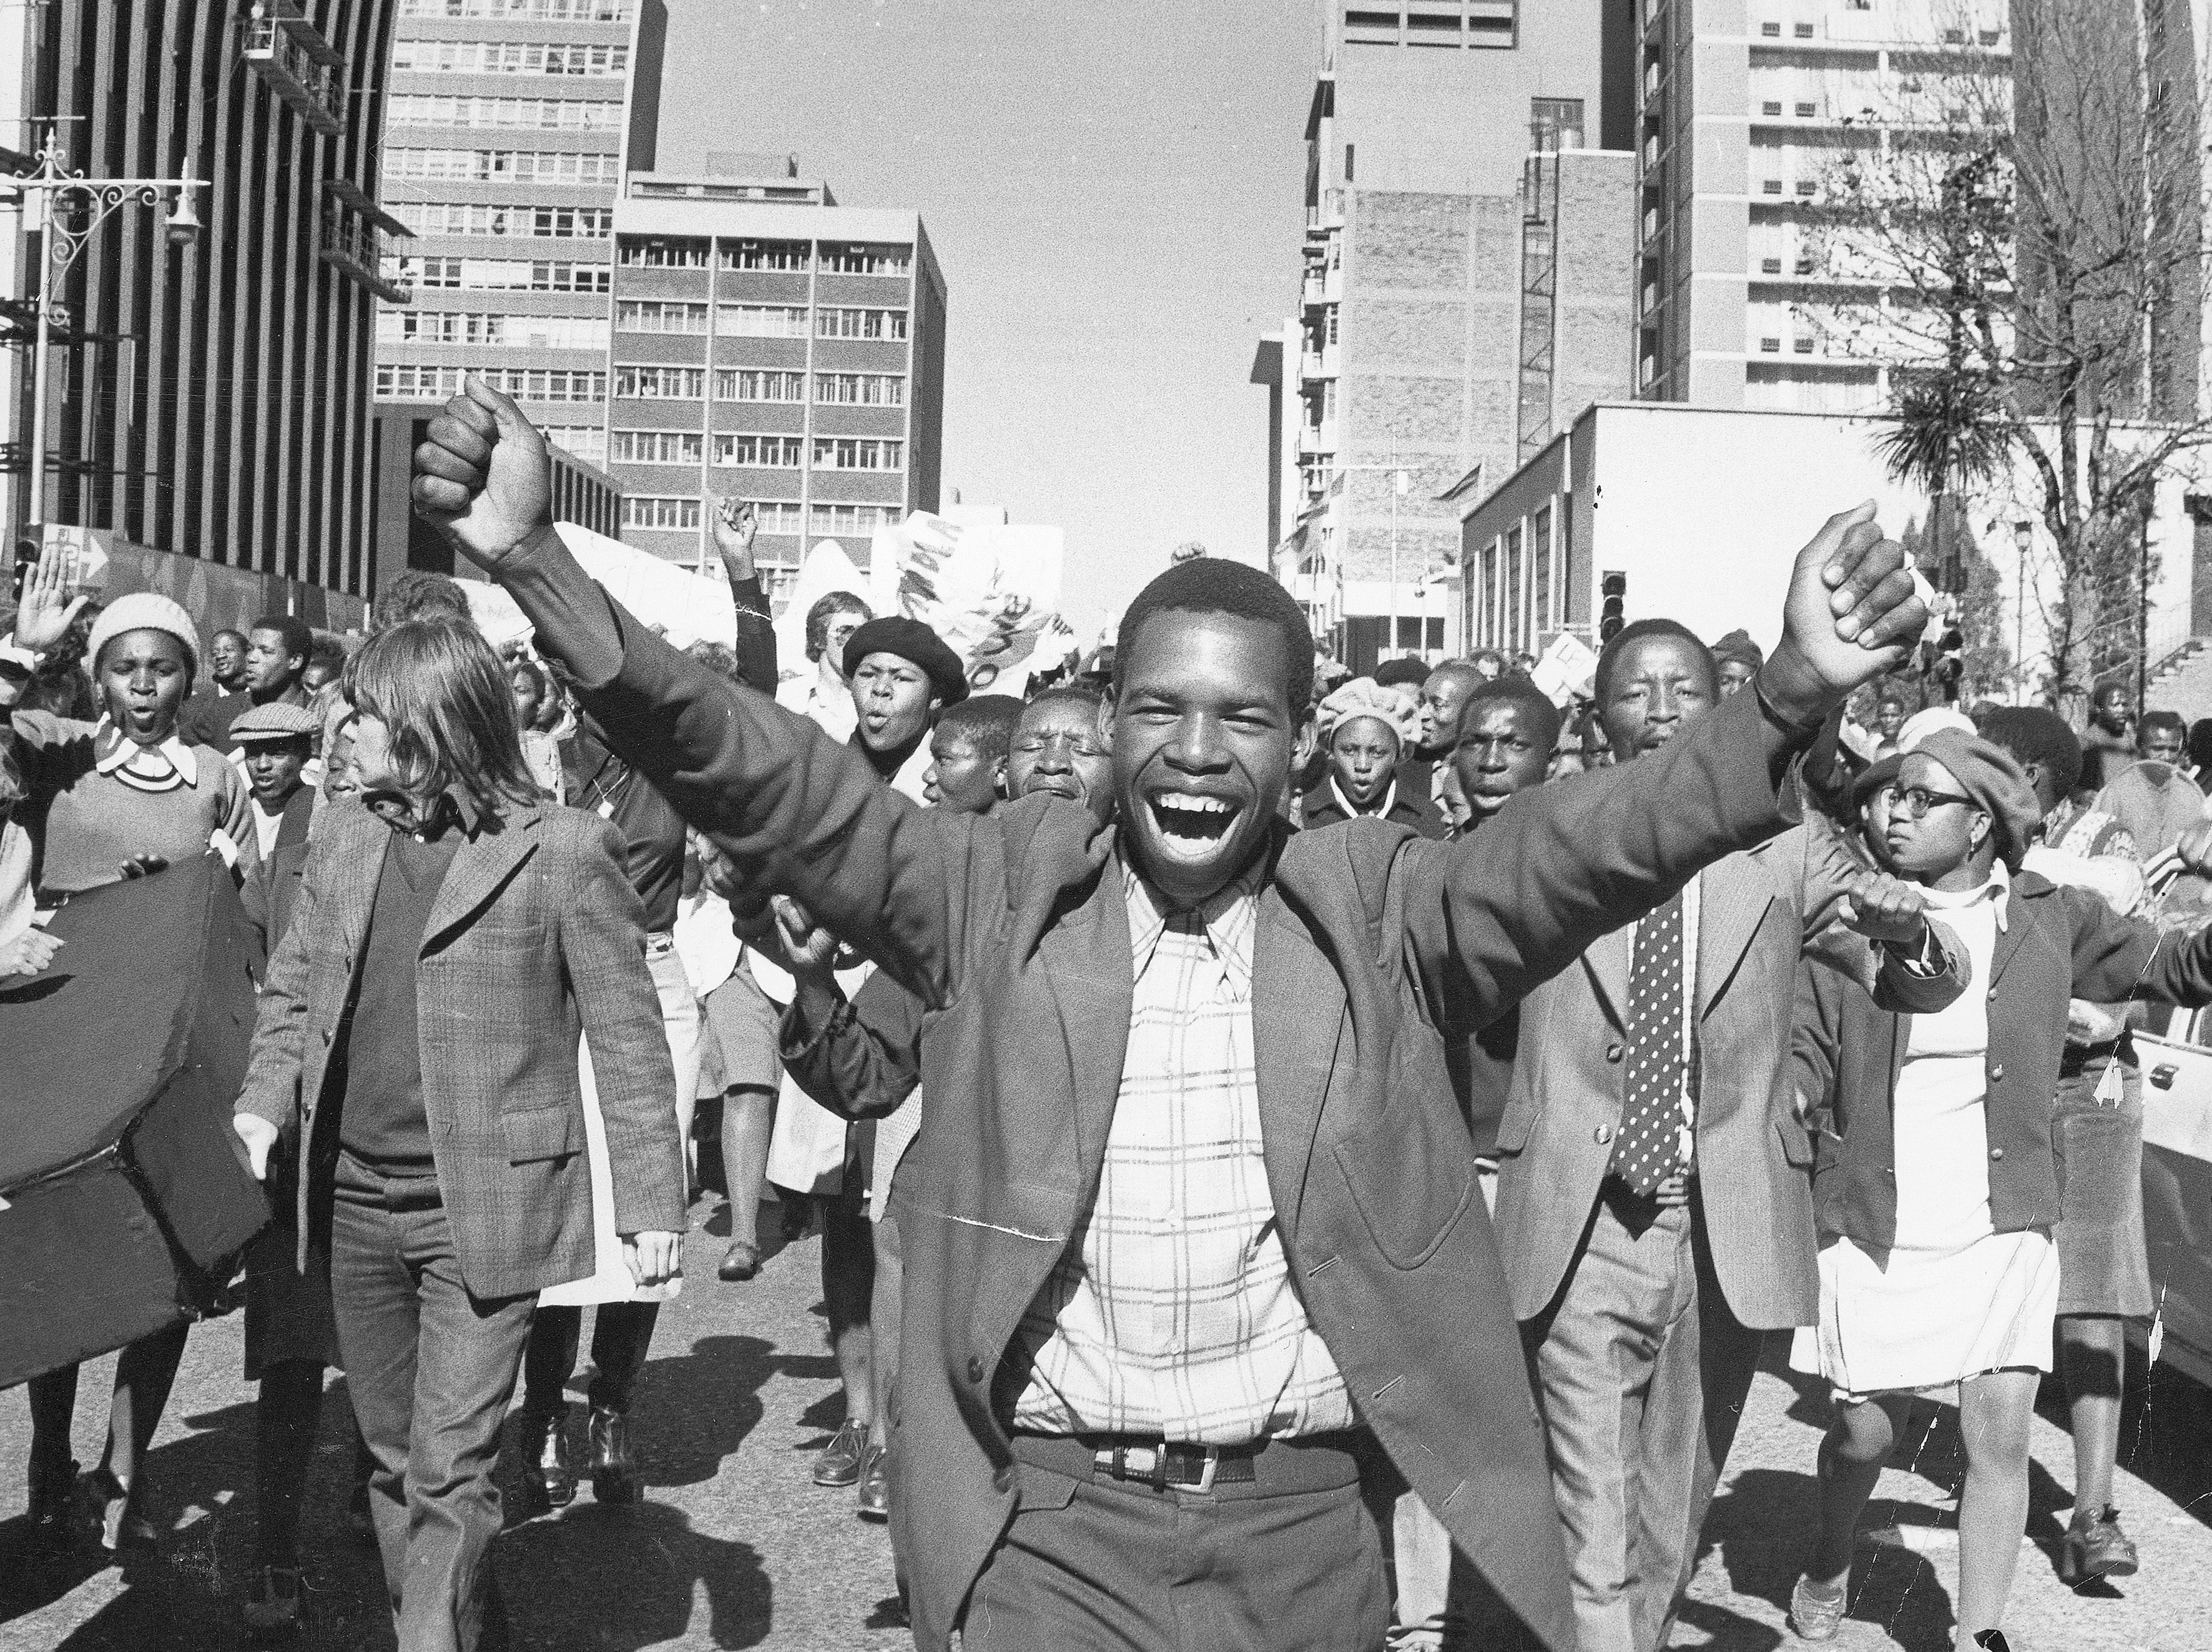 SOUTH AFRICA - June 1967: Protesters during the June 1967 uprising in South Africa. (Photo by Gallo Images / Rapport archives)